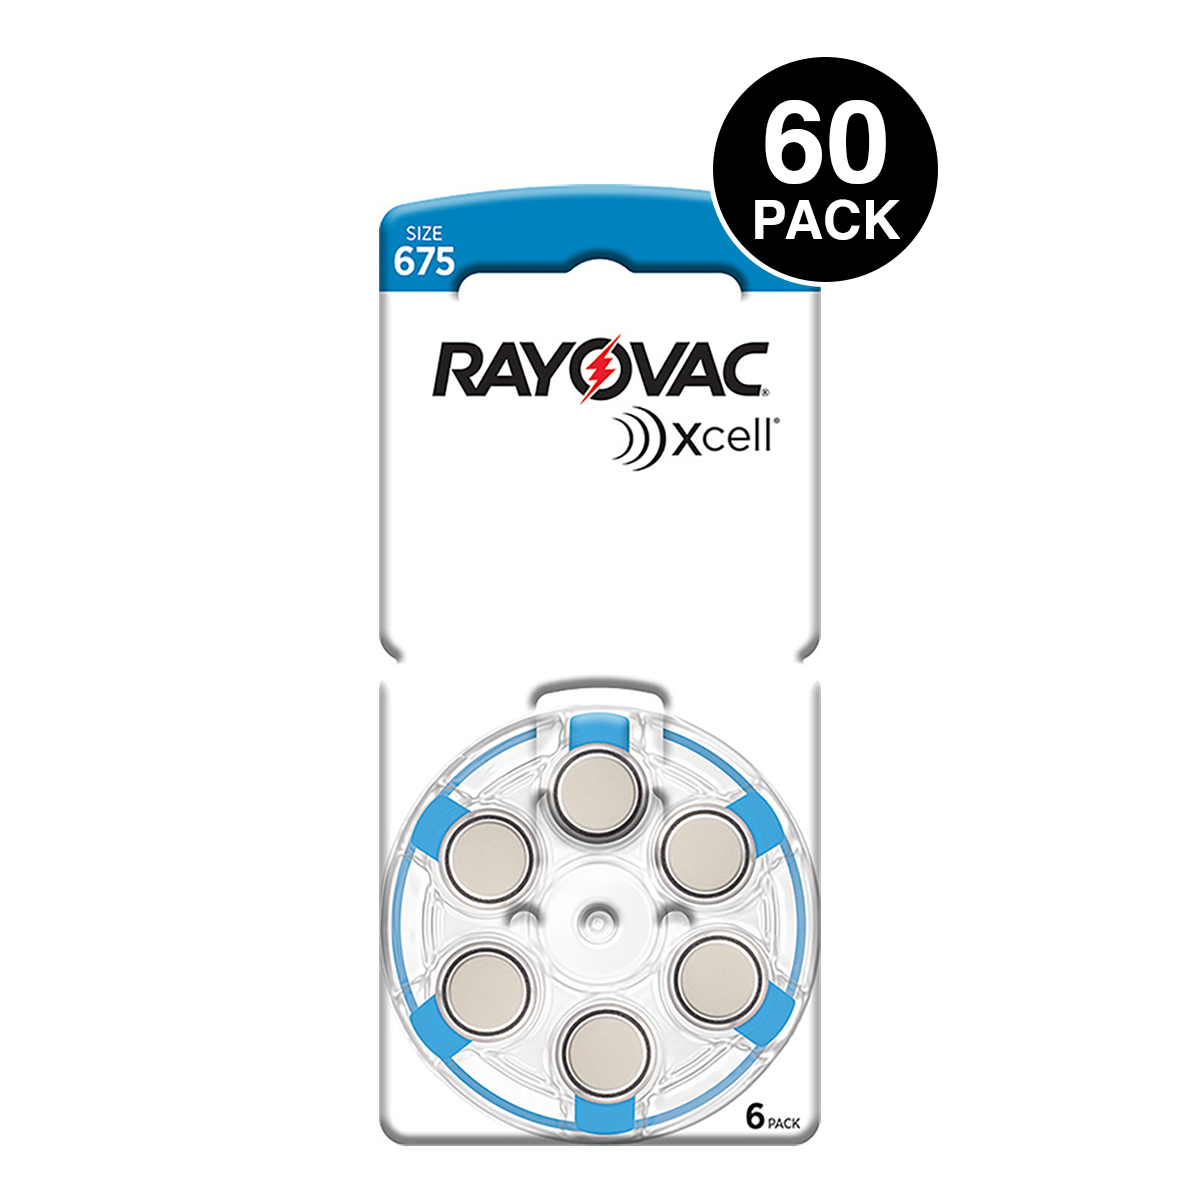 Xcell (Made By Rayovac) Size 675 Hearing Aid Batteries (60 pcs)